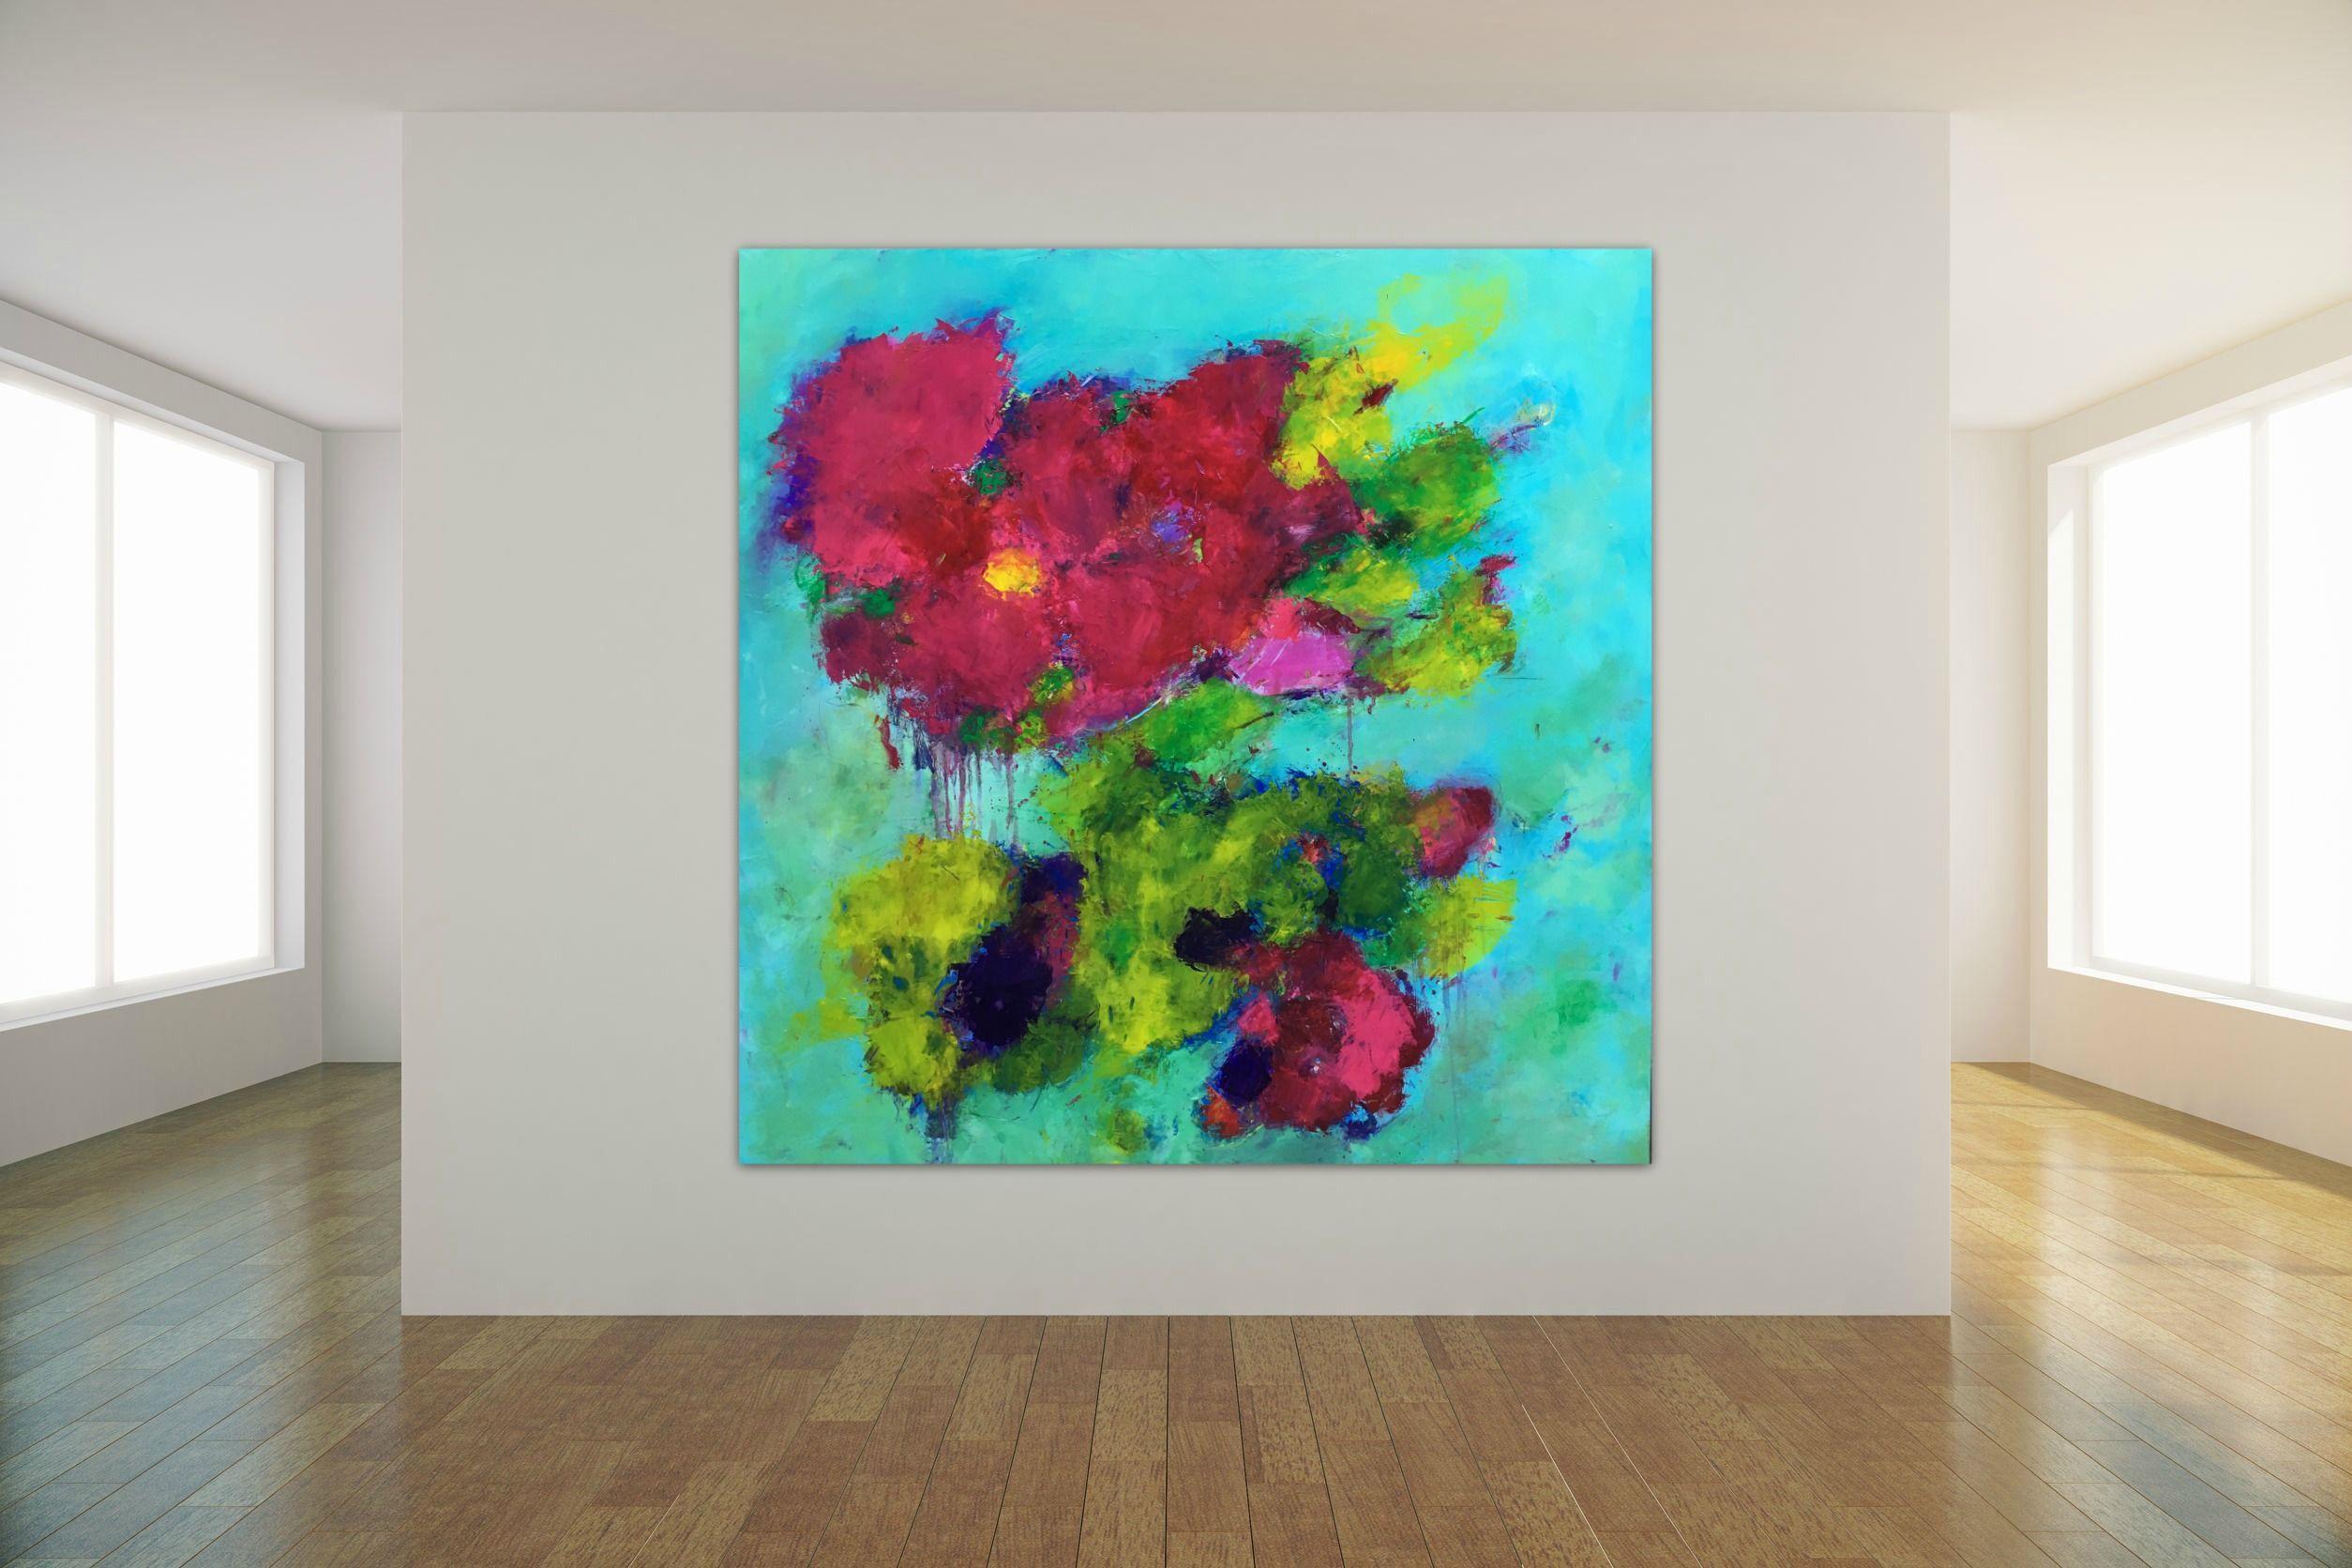 A large abstract floral painting with several layers of oil glazes. The painting was inspired by a recent visit to the beautiful island of Madeira where we stayed in a botanical garden surrounded by a riot of colour. Magenta, red, orange, purple and